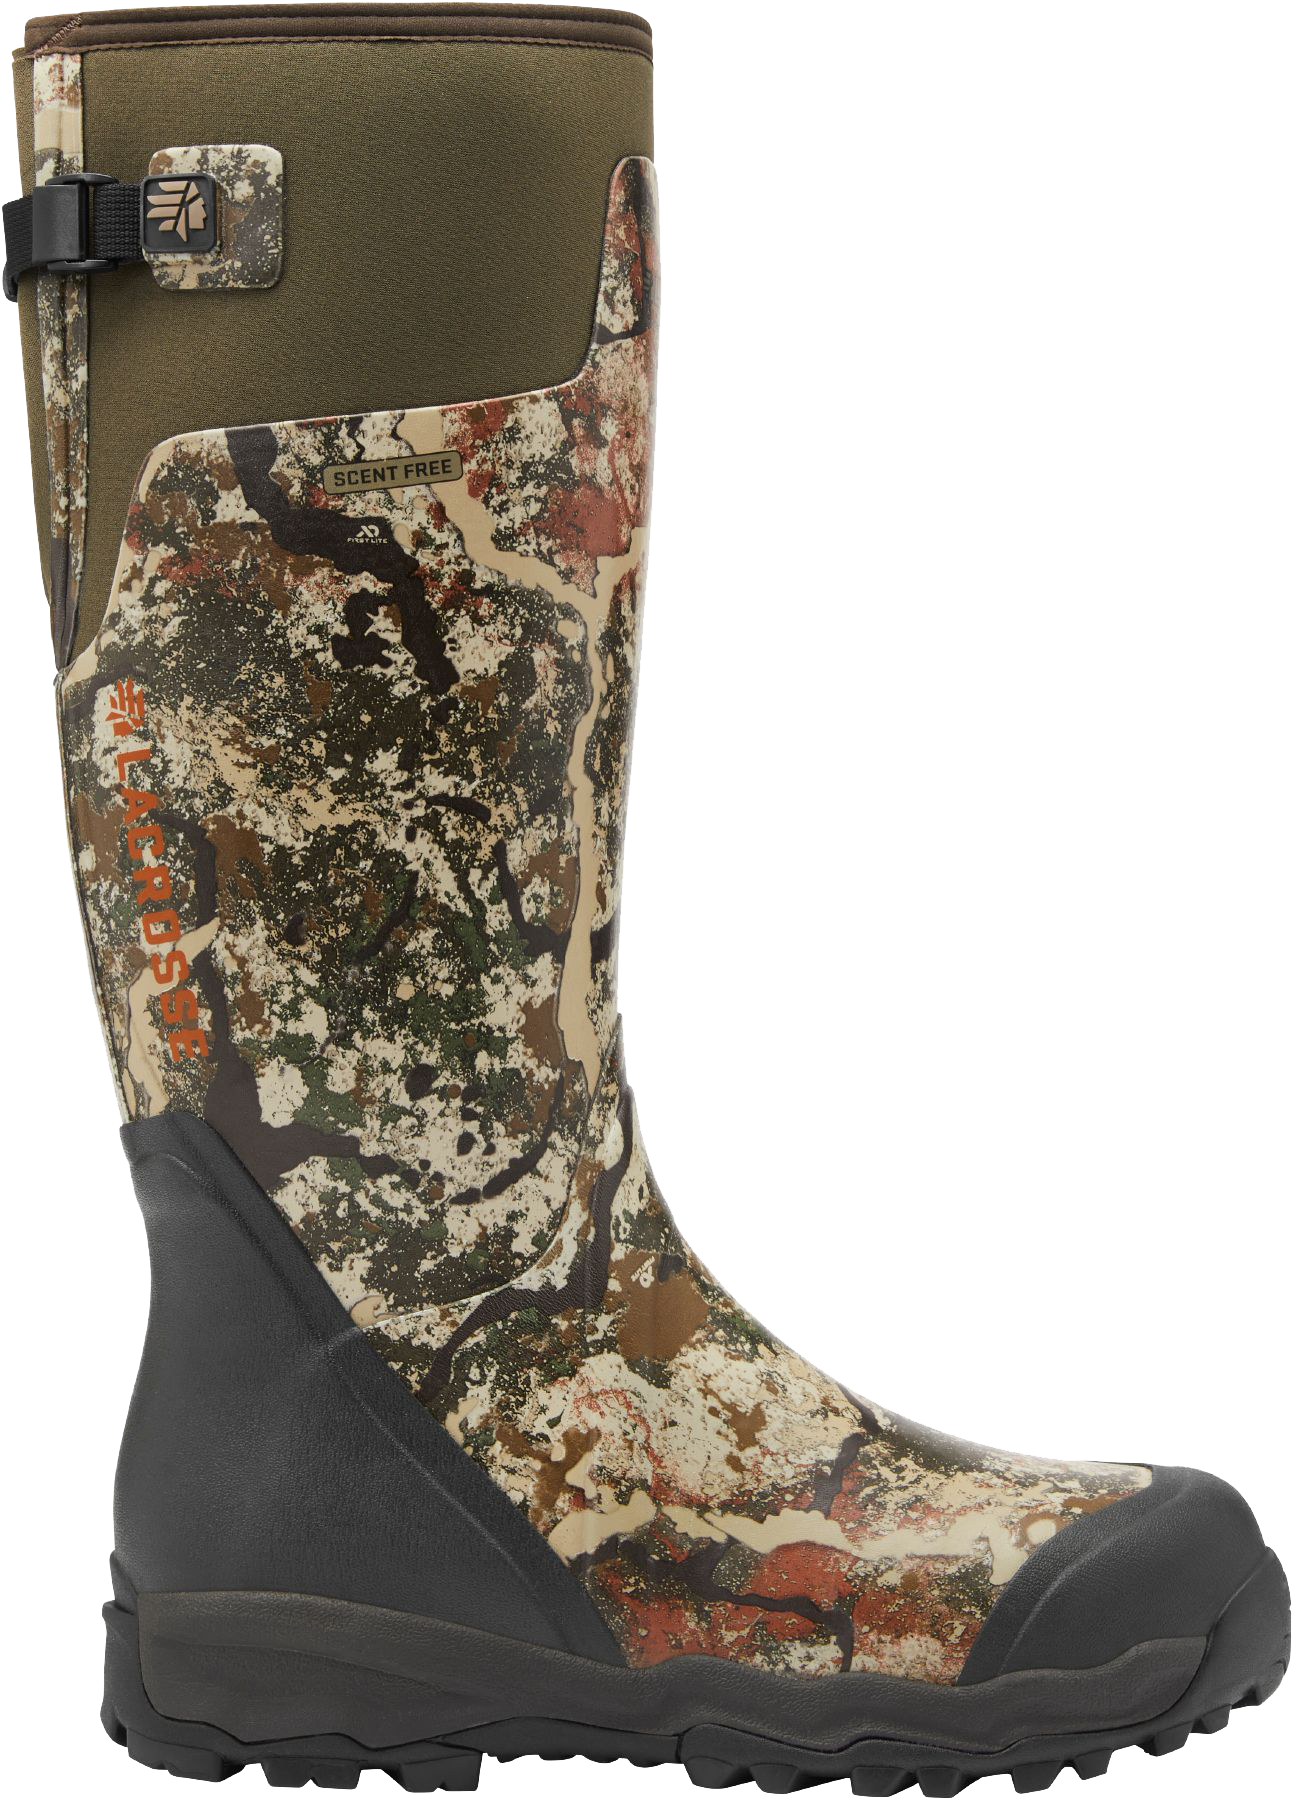 LaCrosse AlphaBurly Pro Hunting Boots for Men - First Lite Specter - 8M